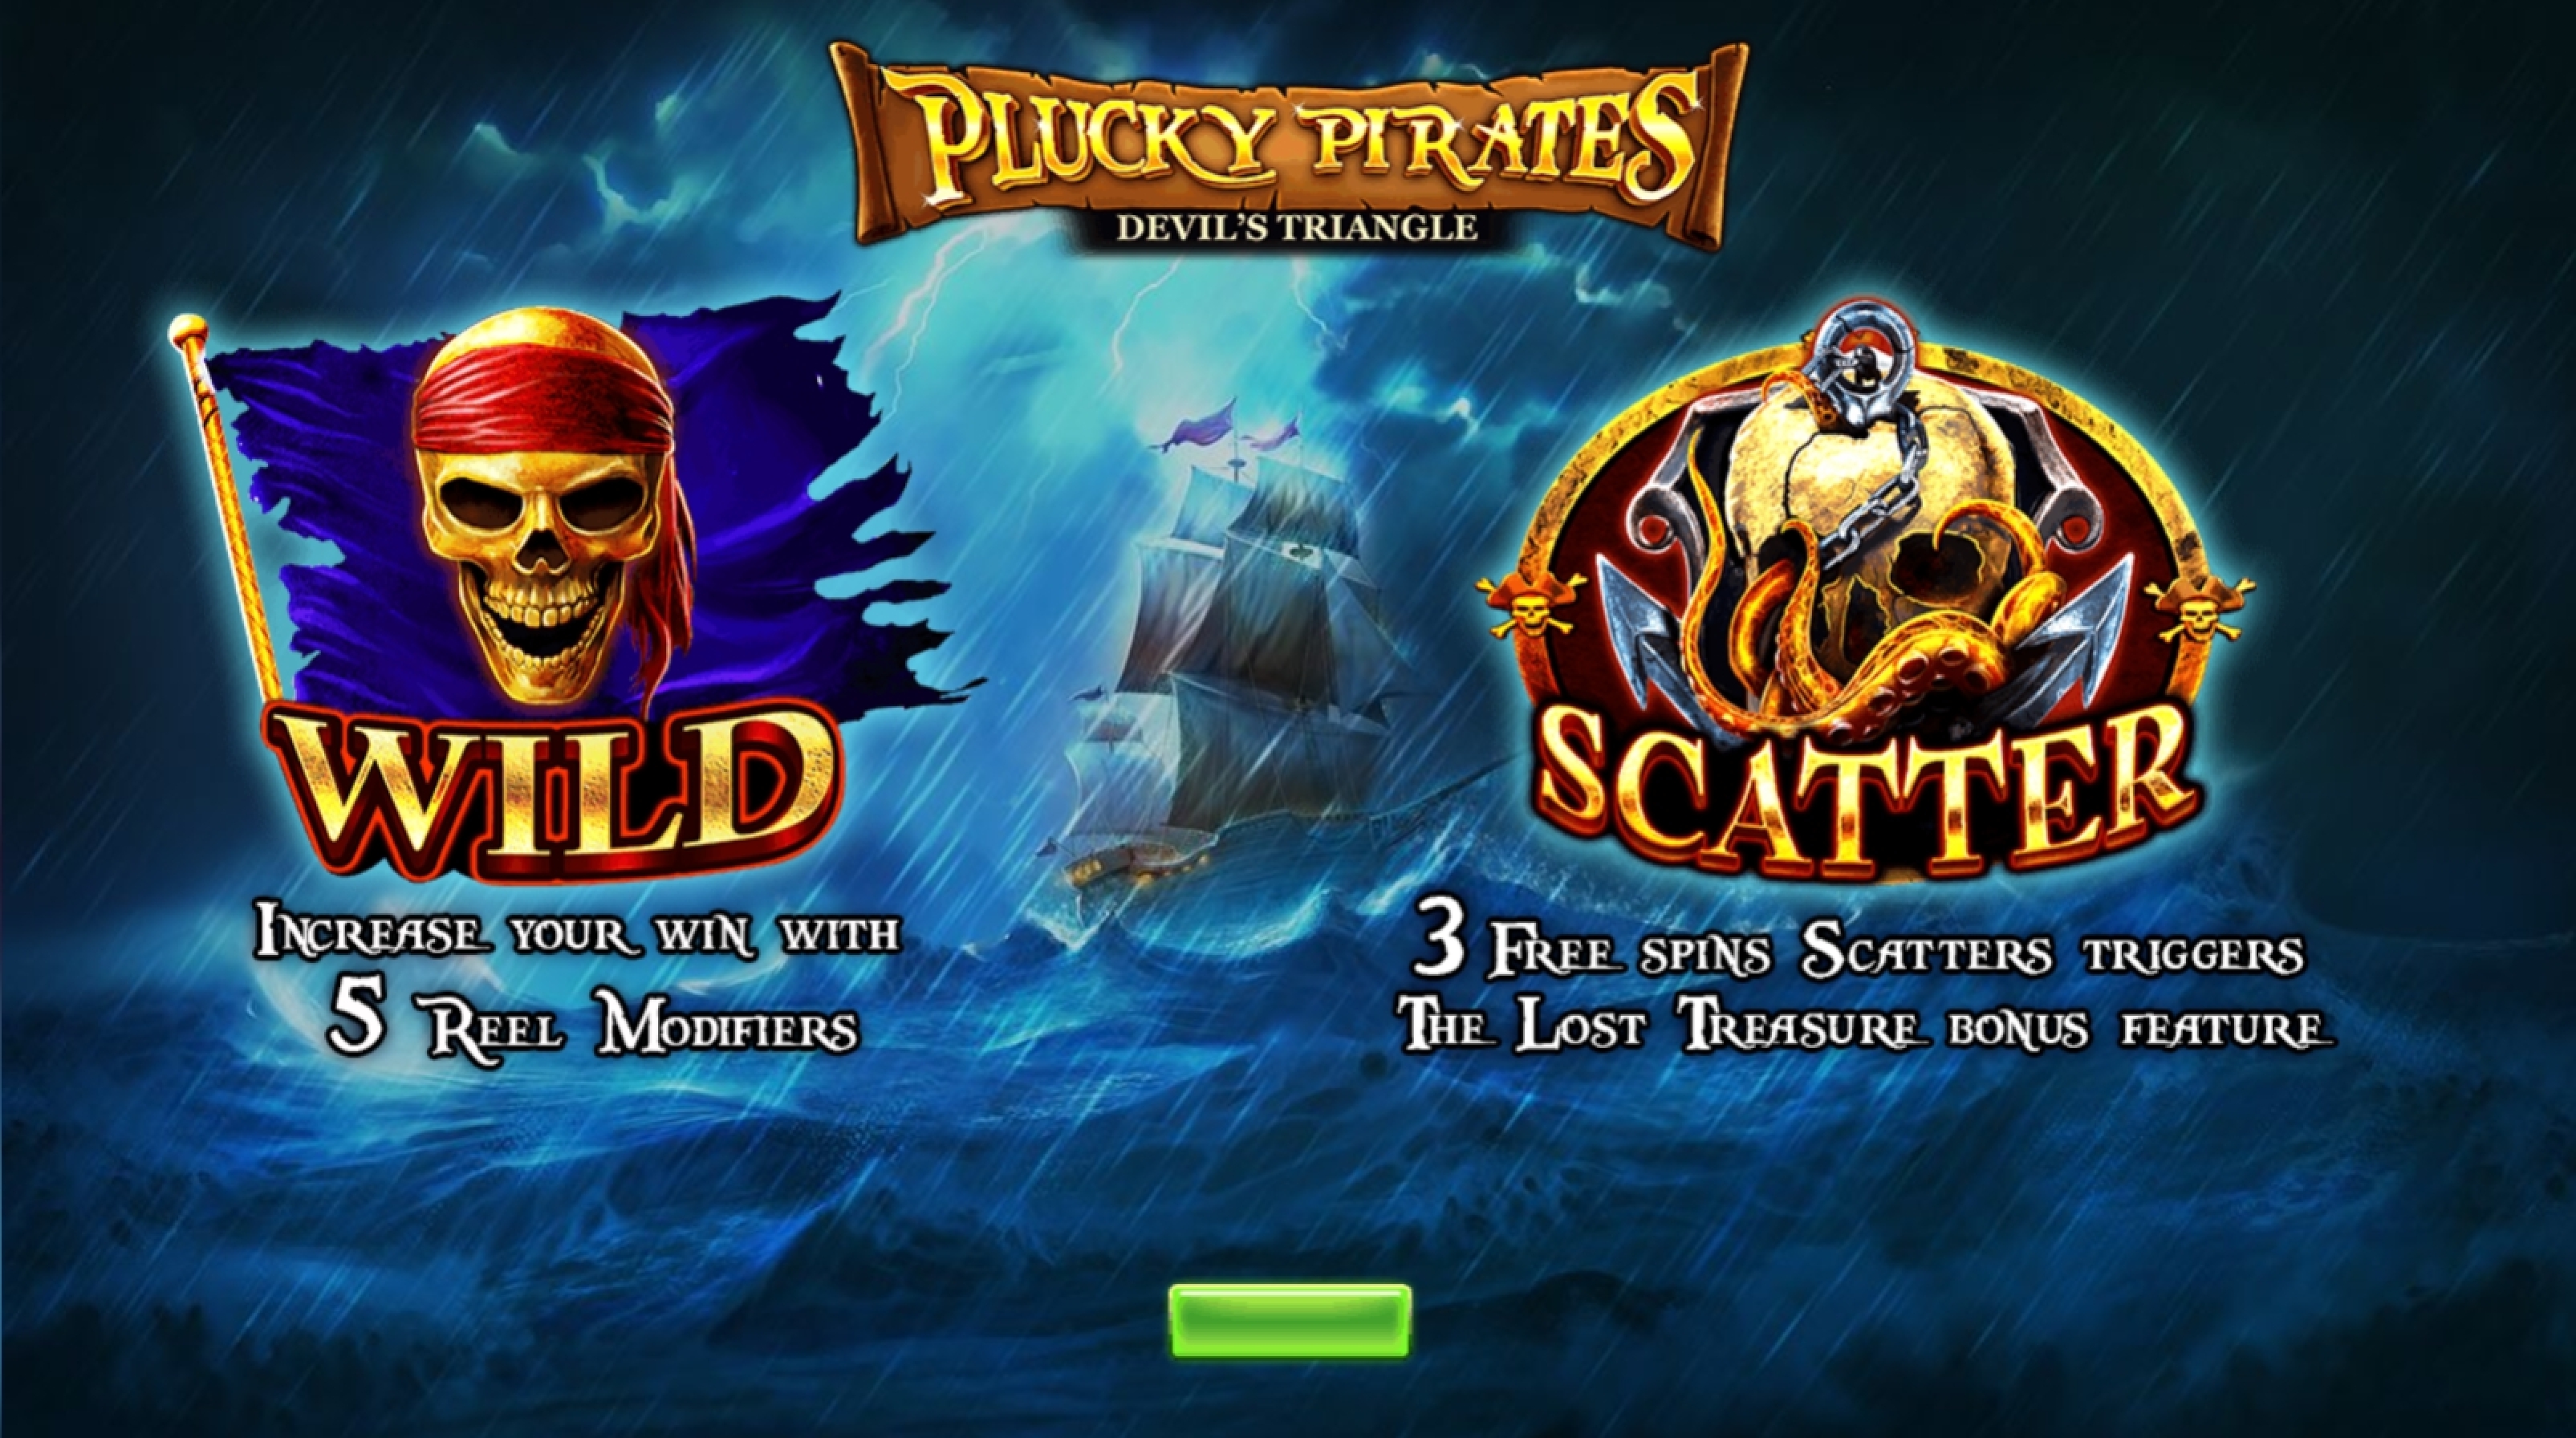 Play Plucky Pirates Devil's Triangle Free Casino Slot Game by Rocksalt Interactive